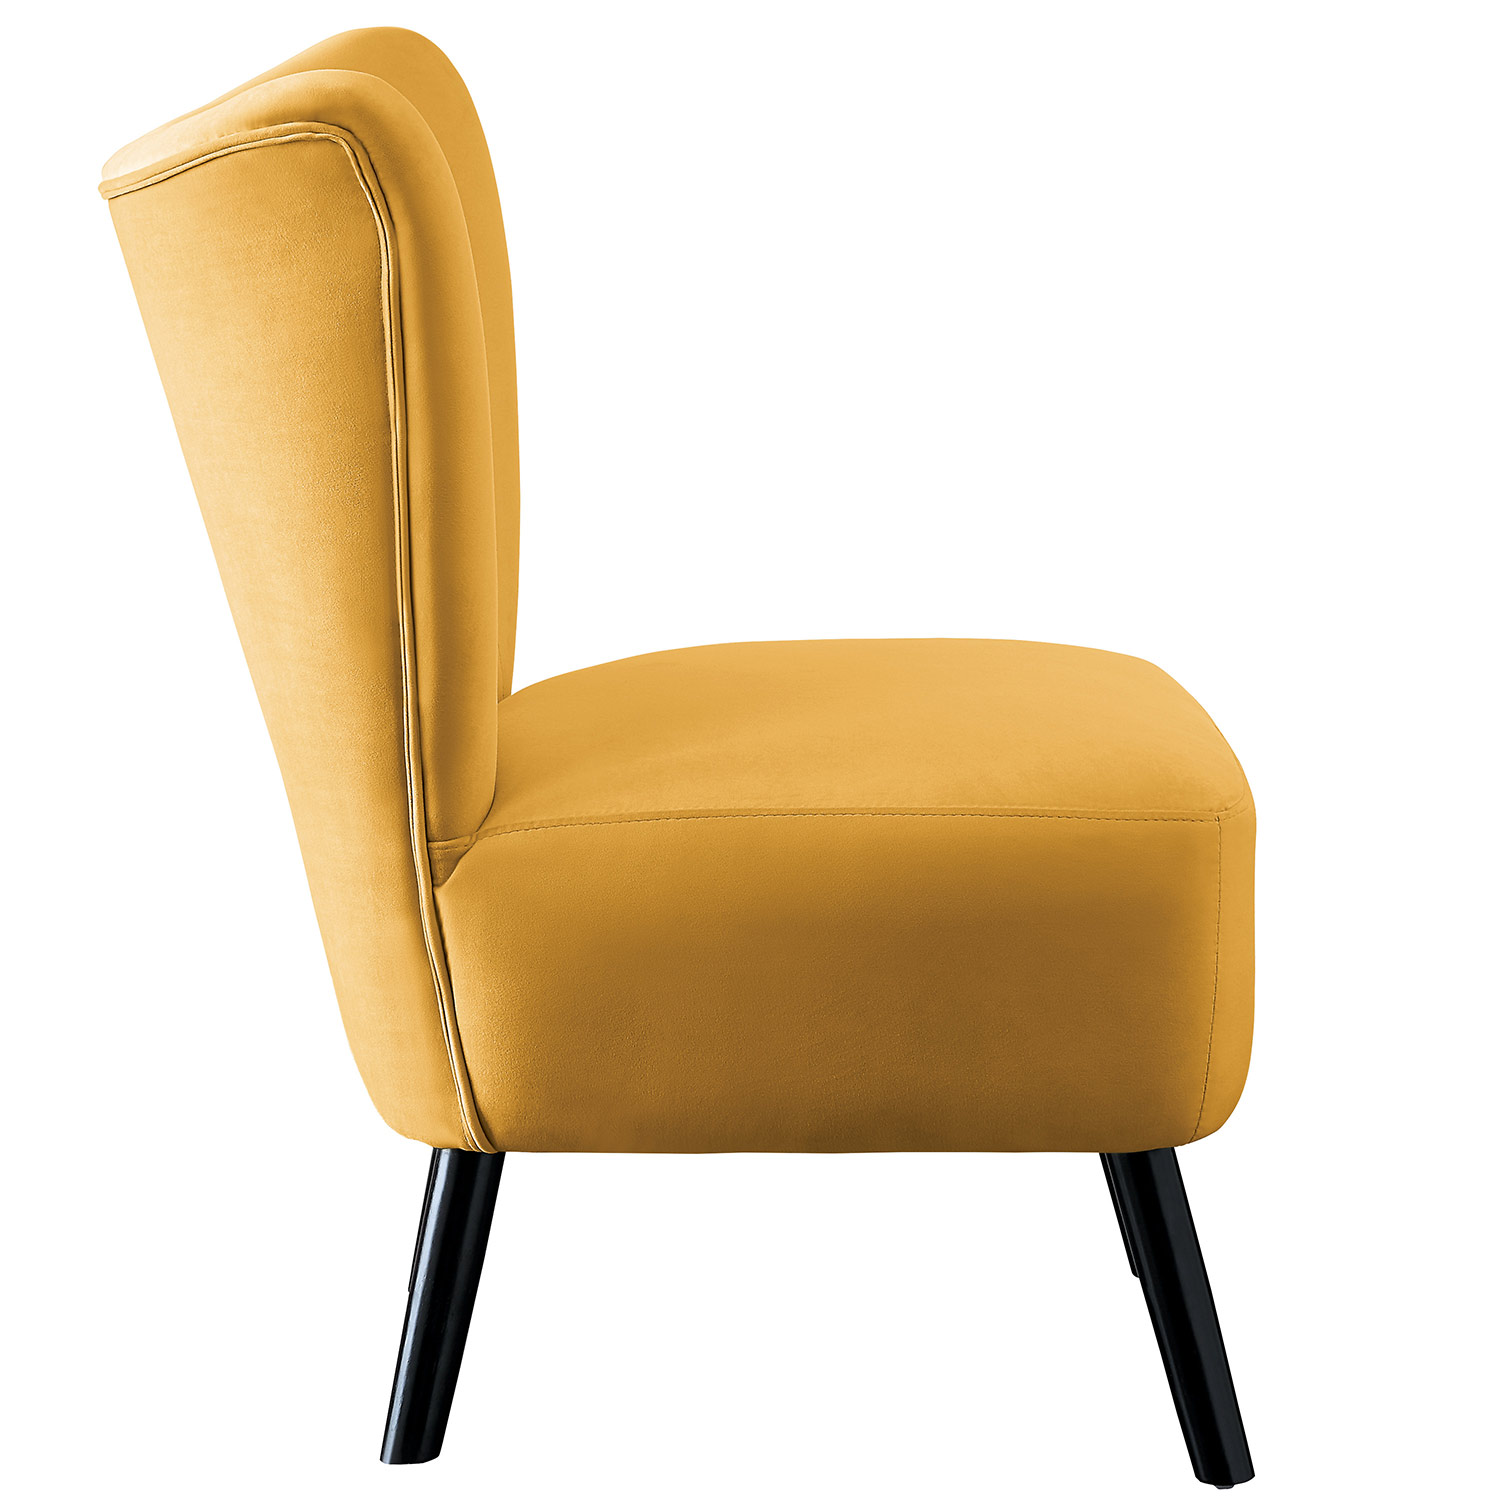 Homelegance Imani Accent Chair - Yellow